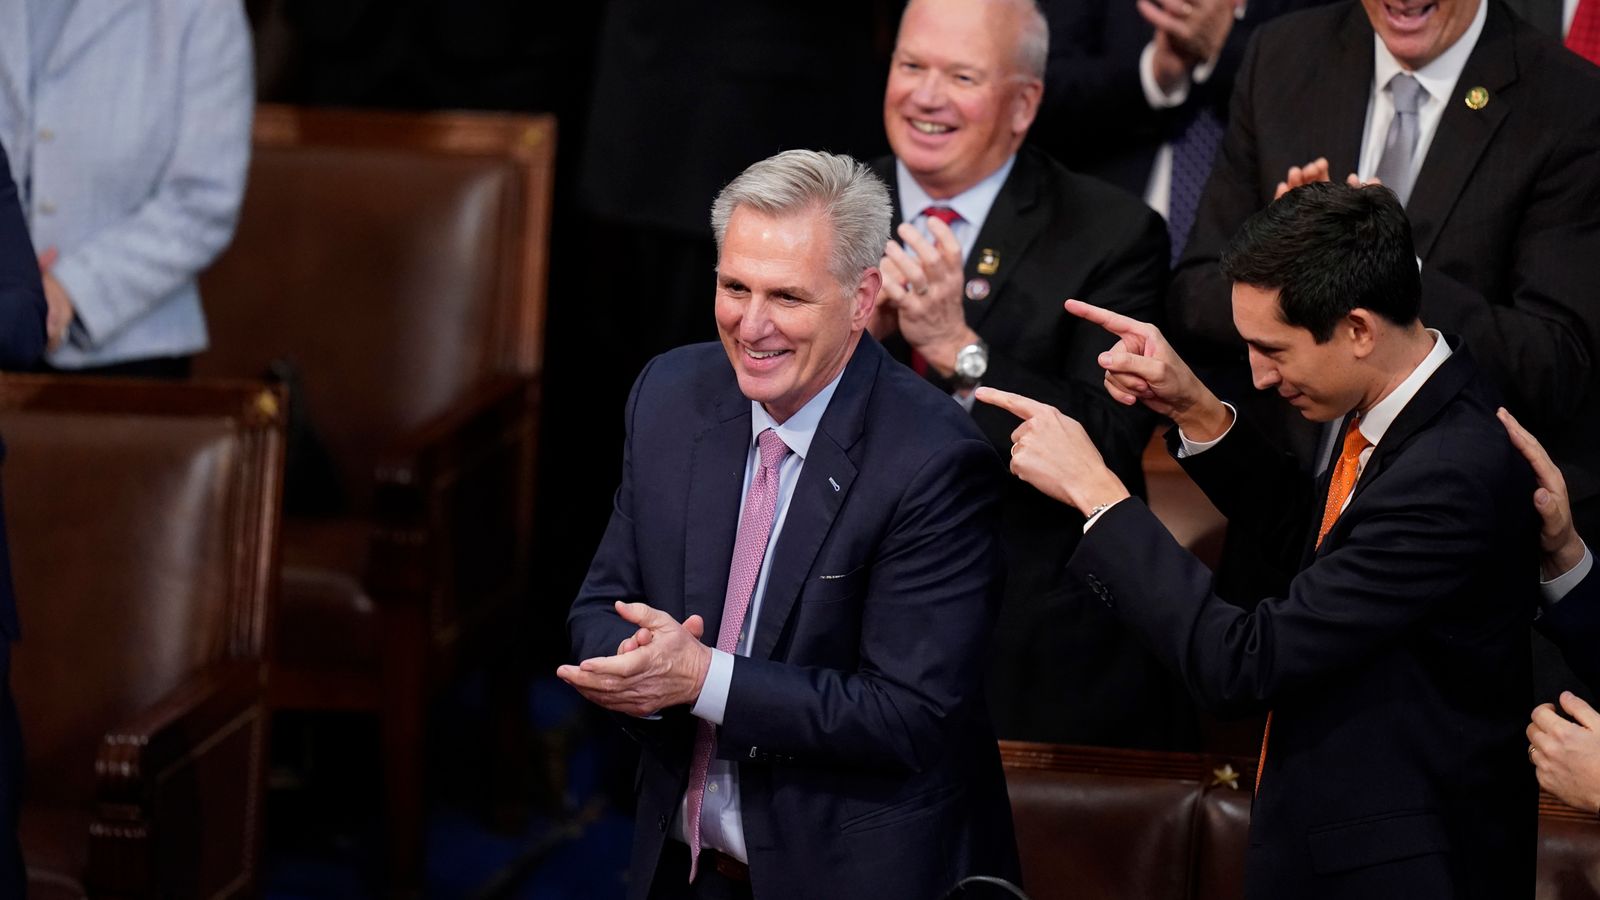 Kevin McCarthy finally wins US Speaker vote after tensions boil over in chaotic Congress scenes 